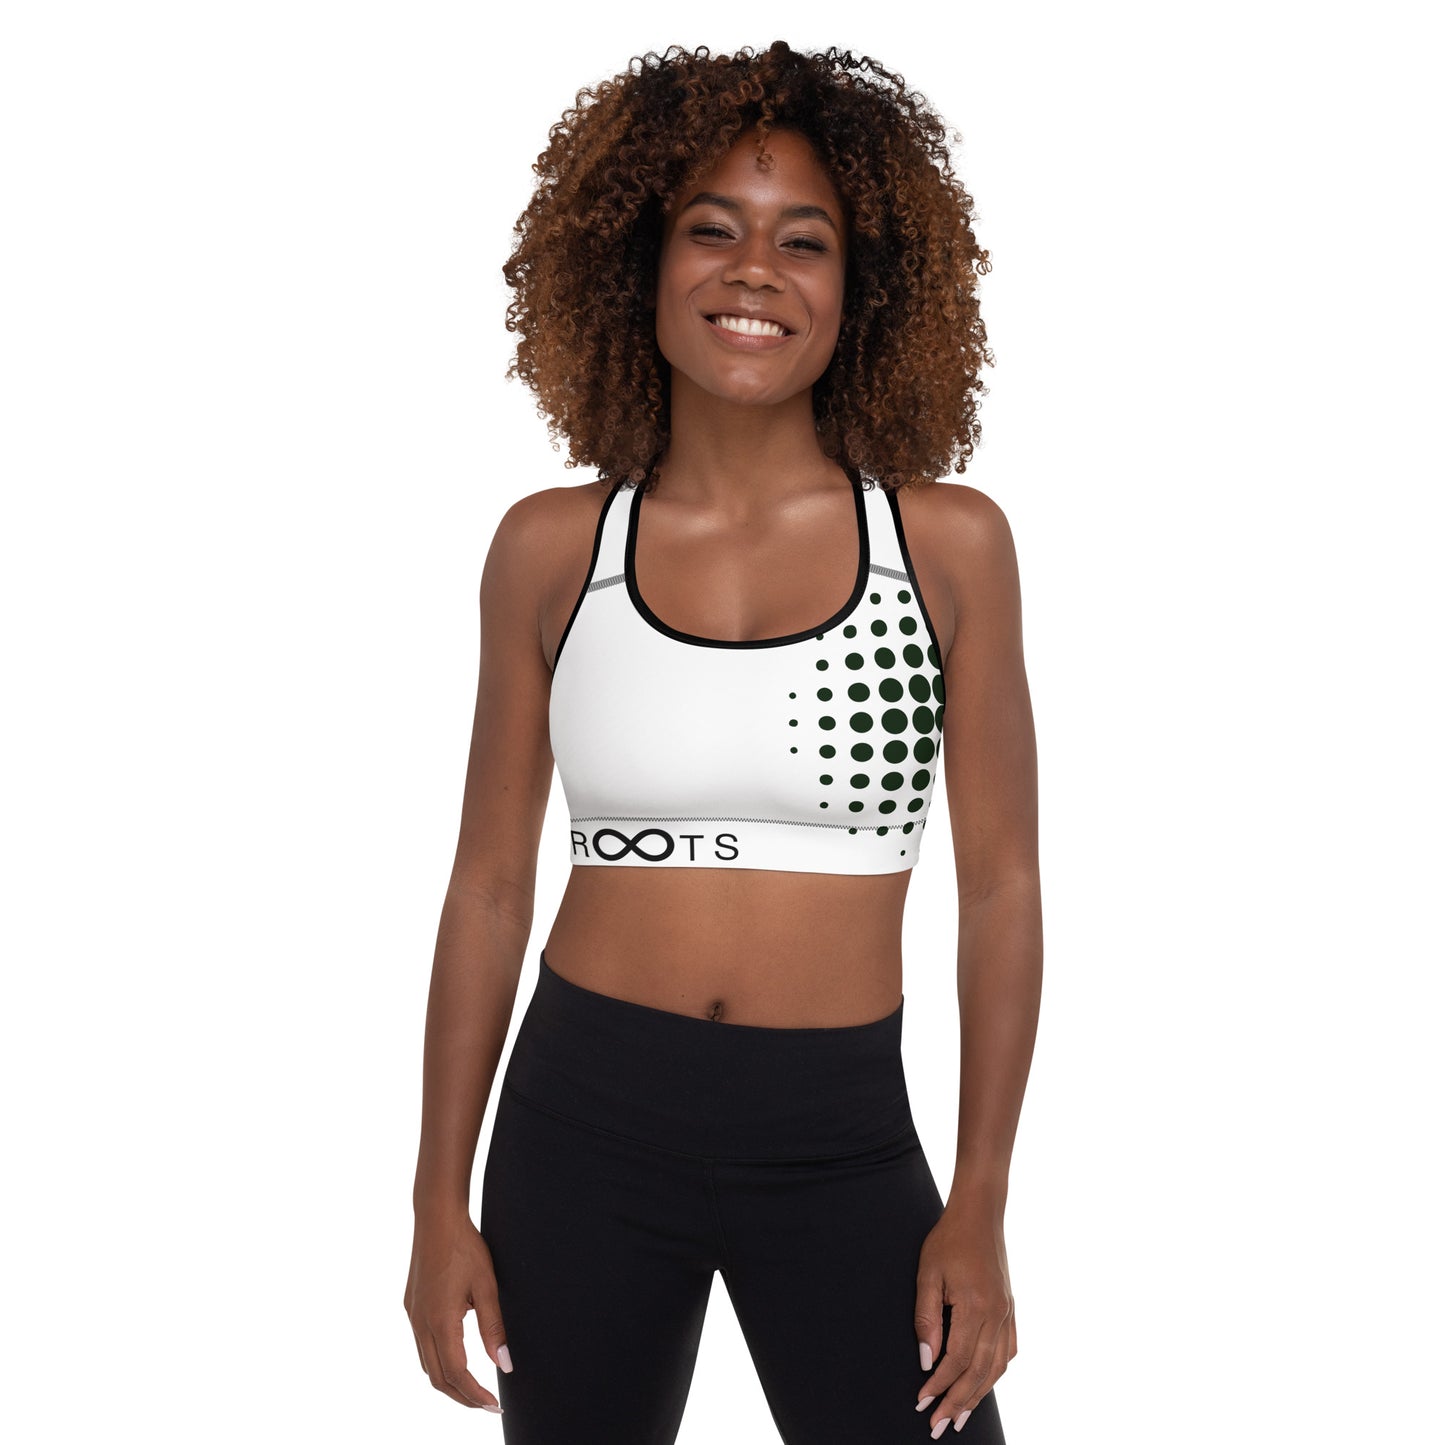 Roots Are Forever Padded Sports Bra